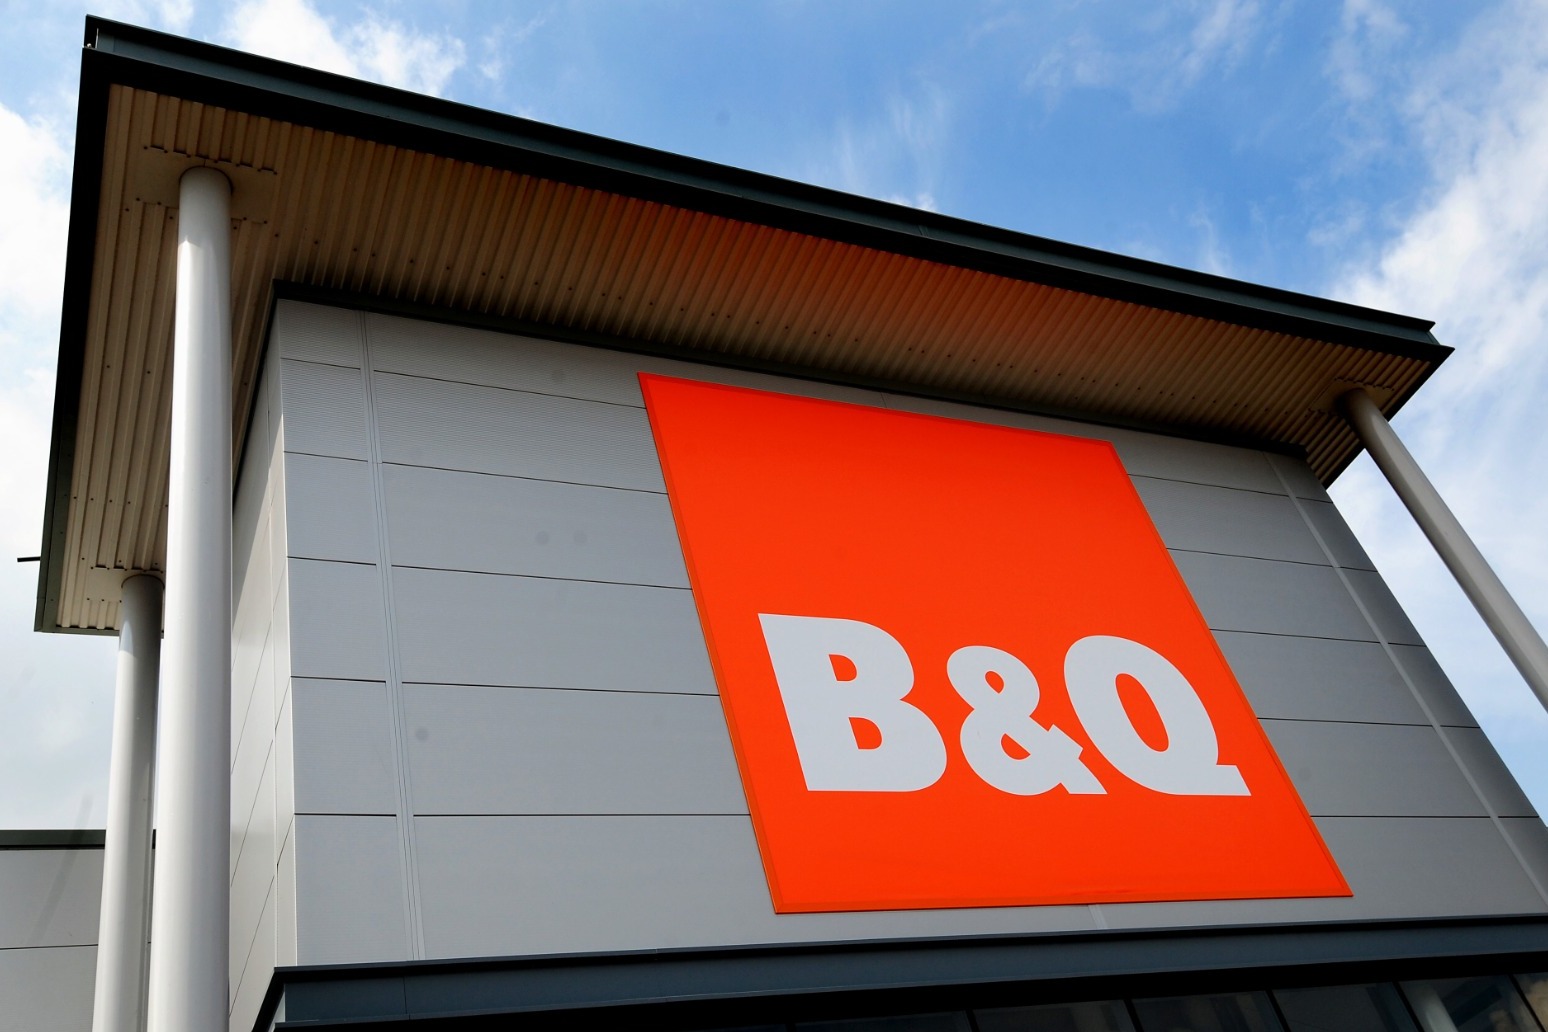 B&Q owner to update outlook for DIY sector amid income squeeze 